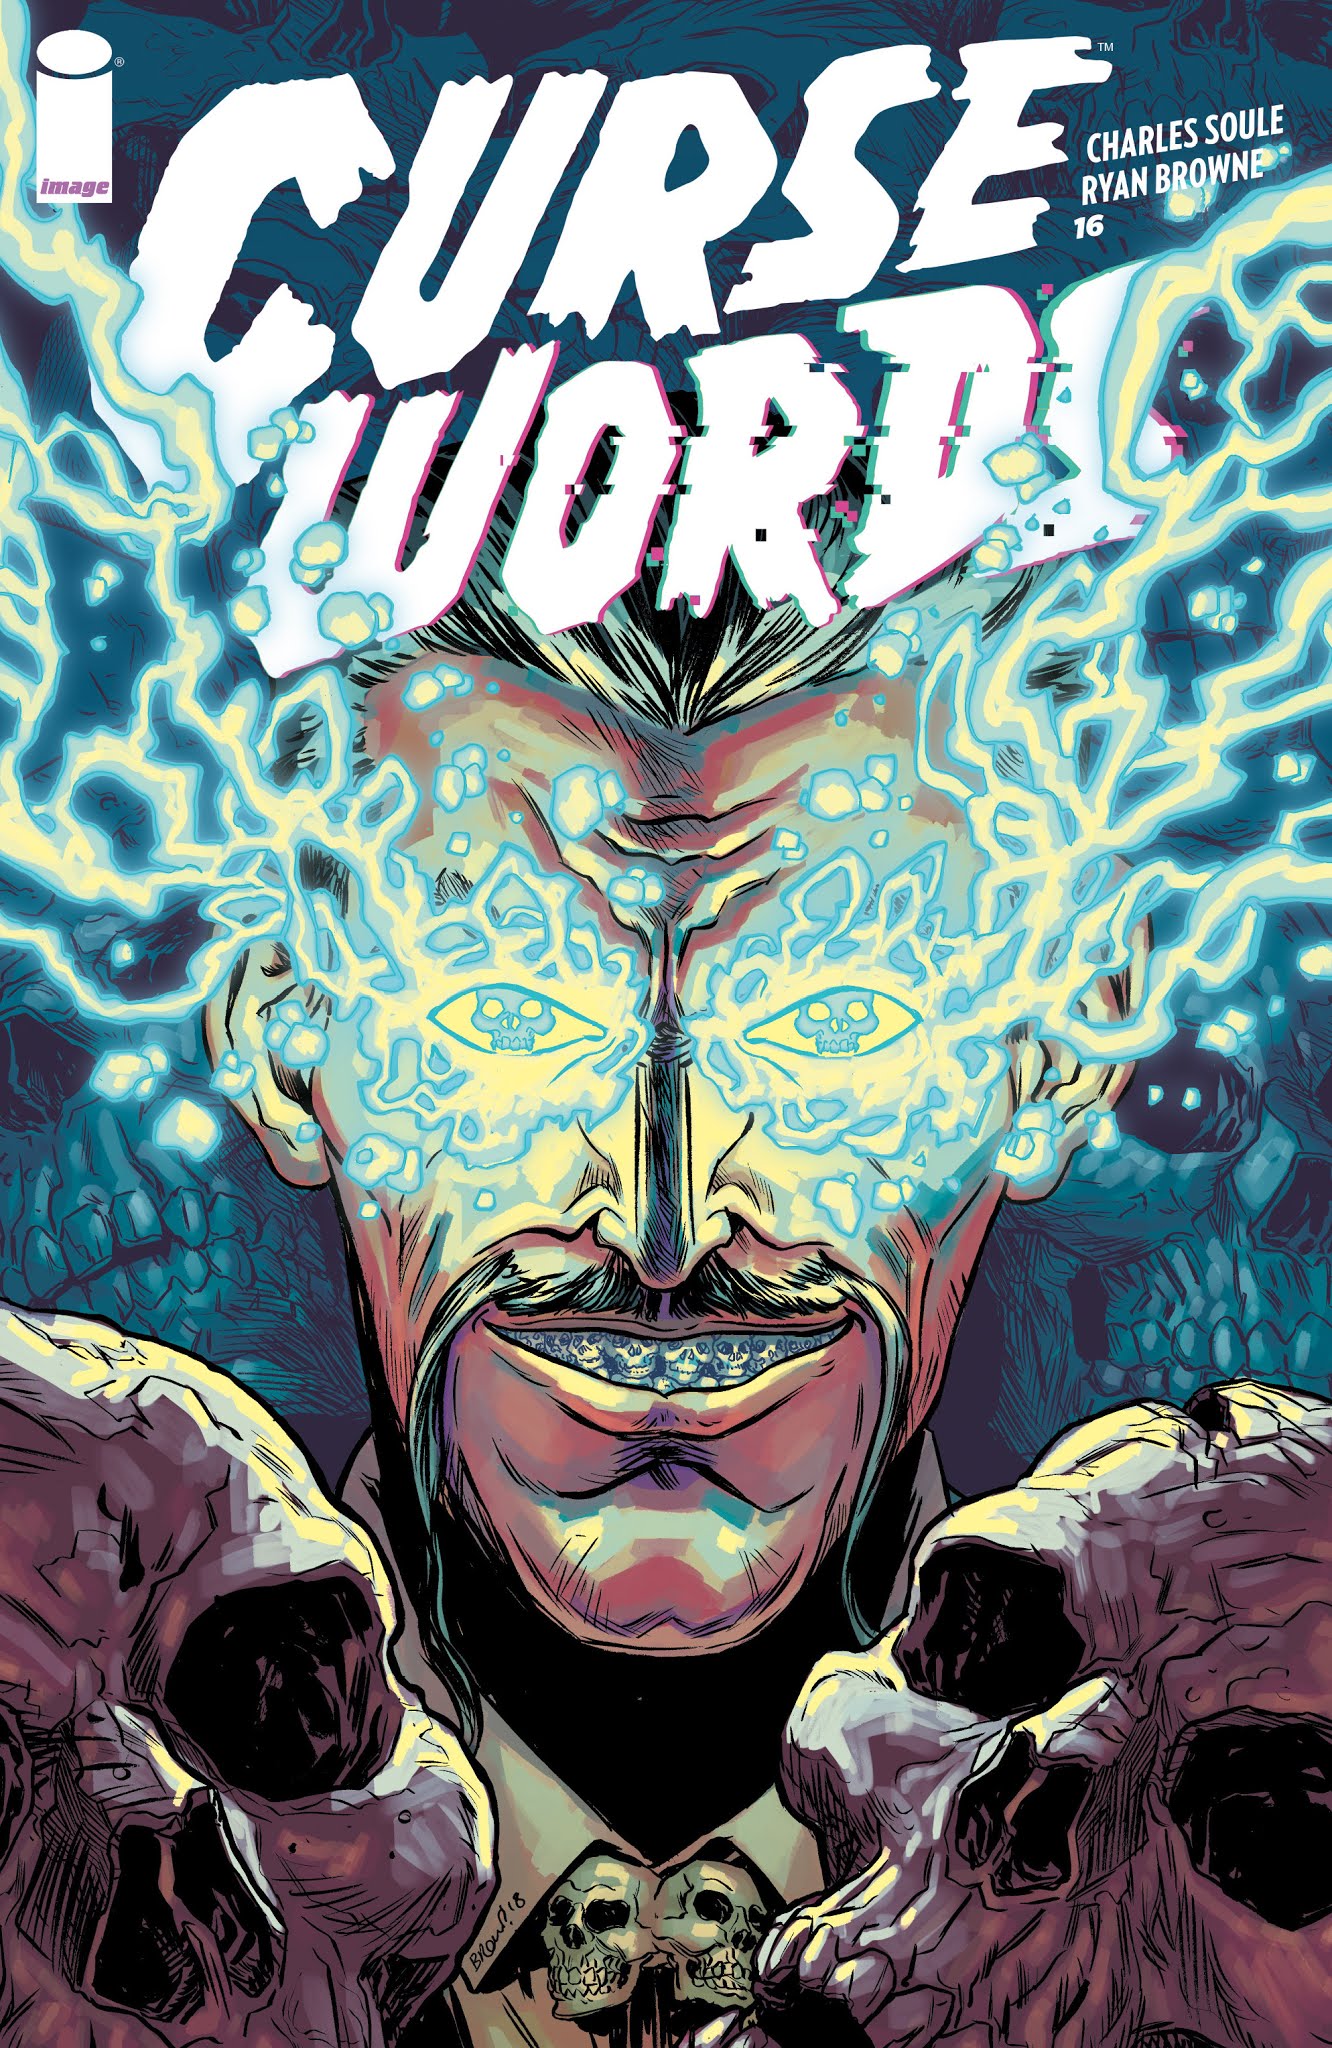 Read online Curse Words comic -  Issue #16 - 1